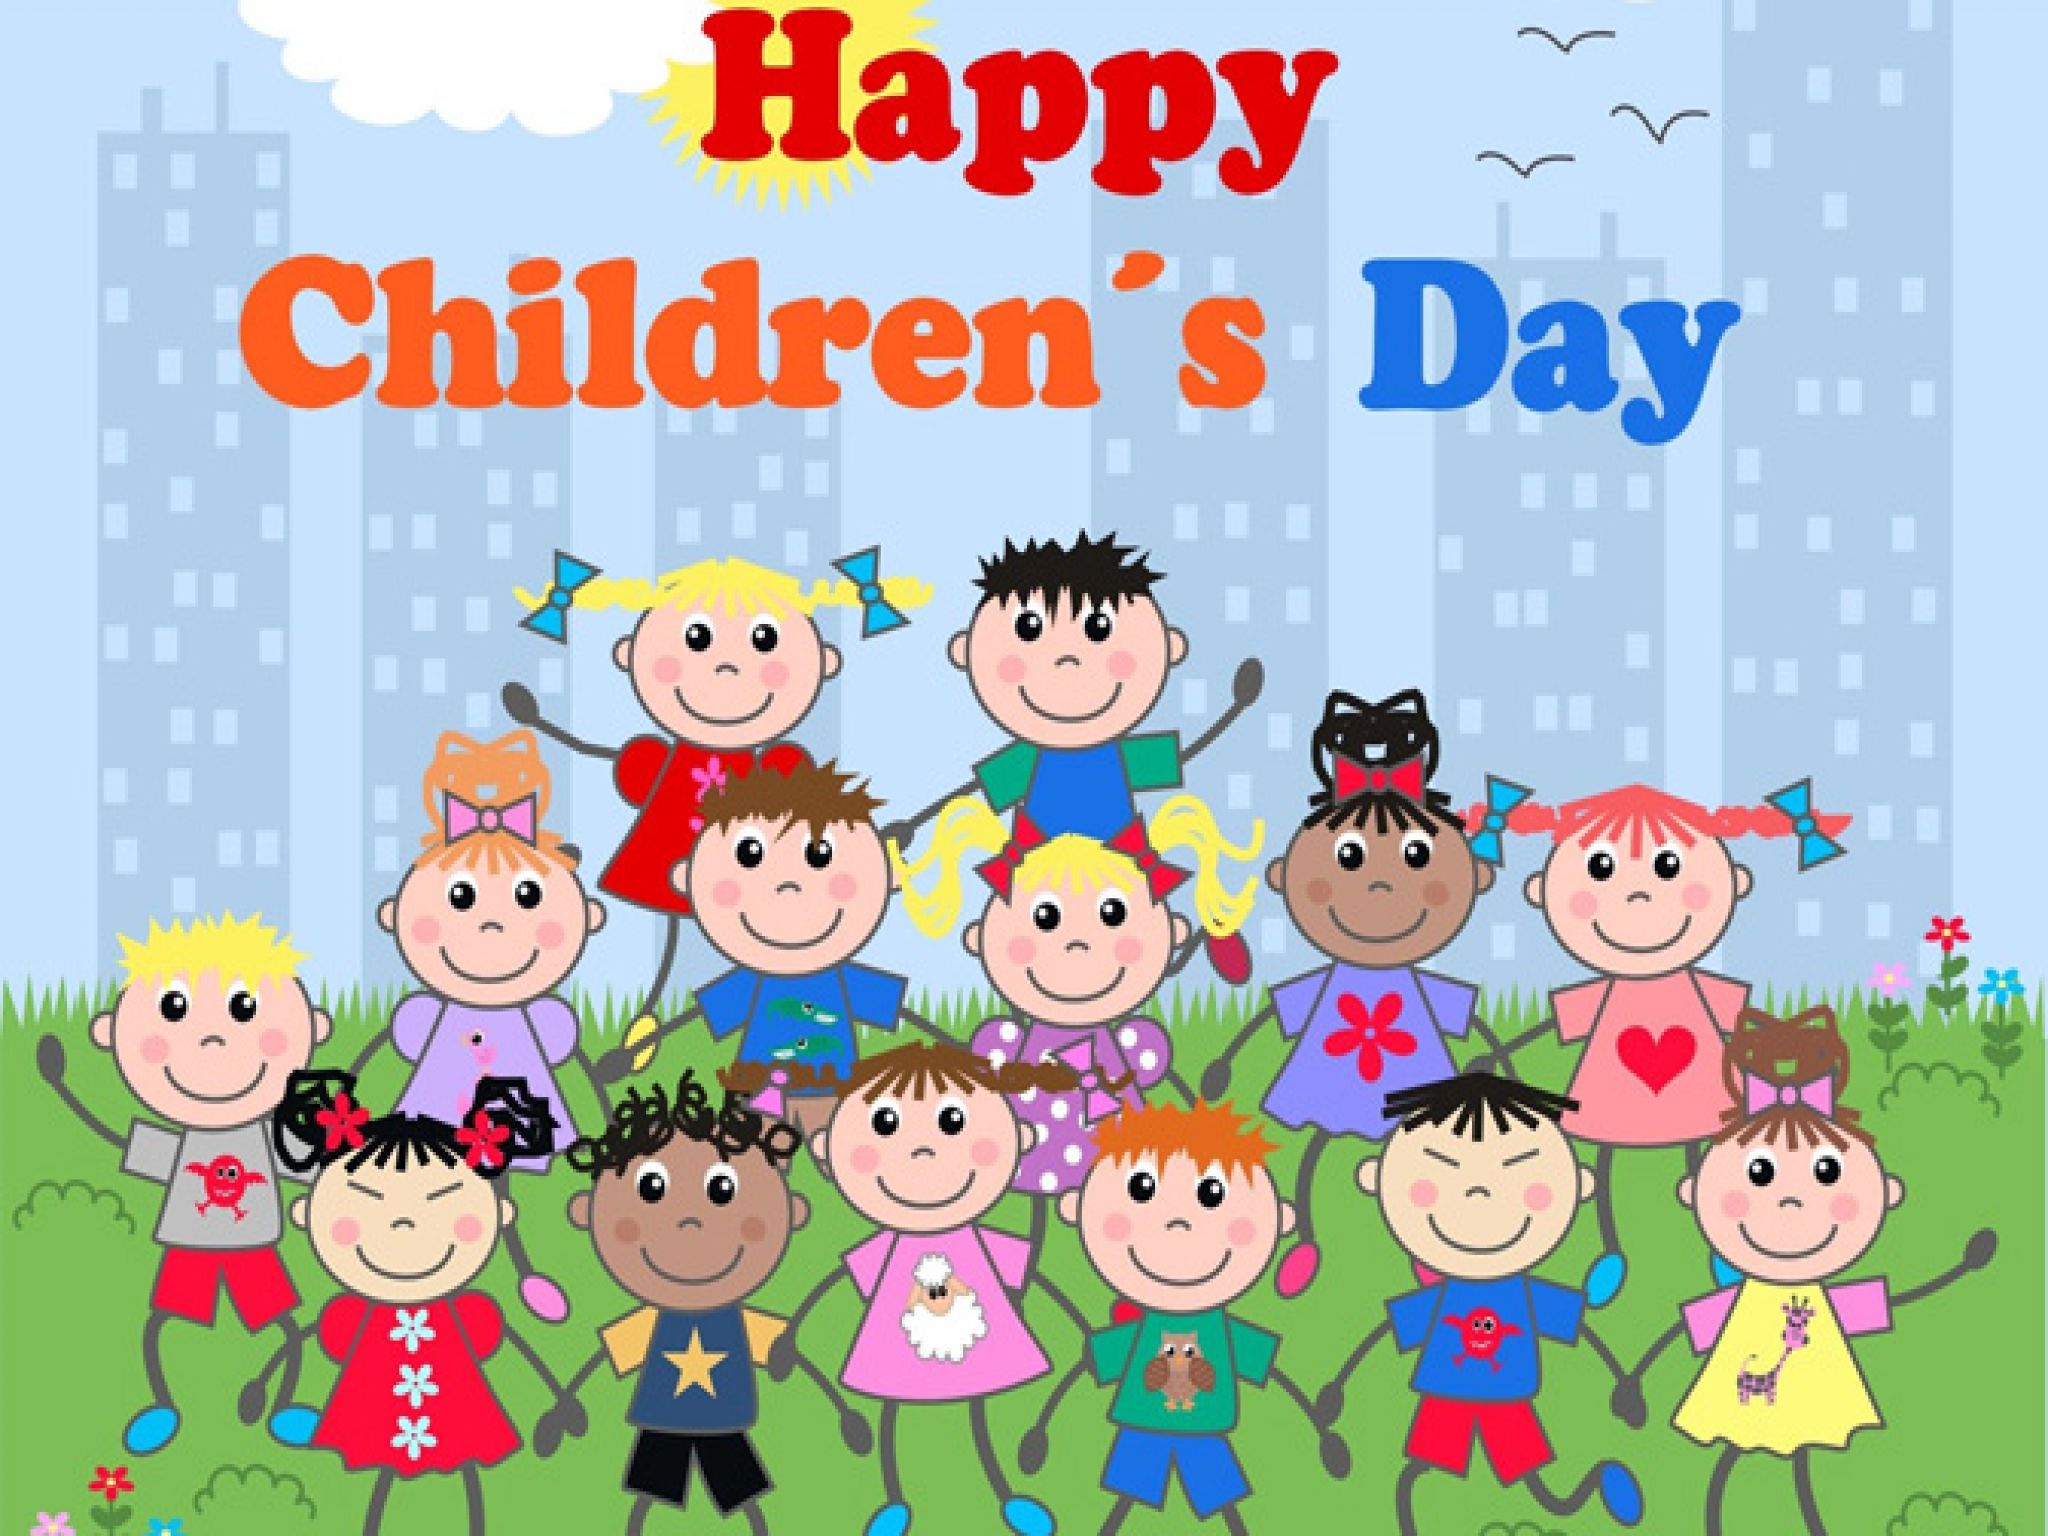 Happy Children's Day! New ecard for free! The best greeting card for You